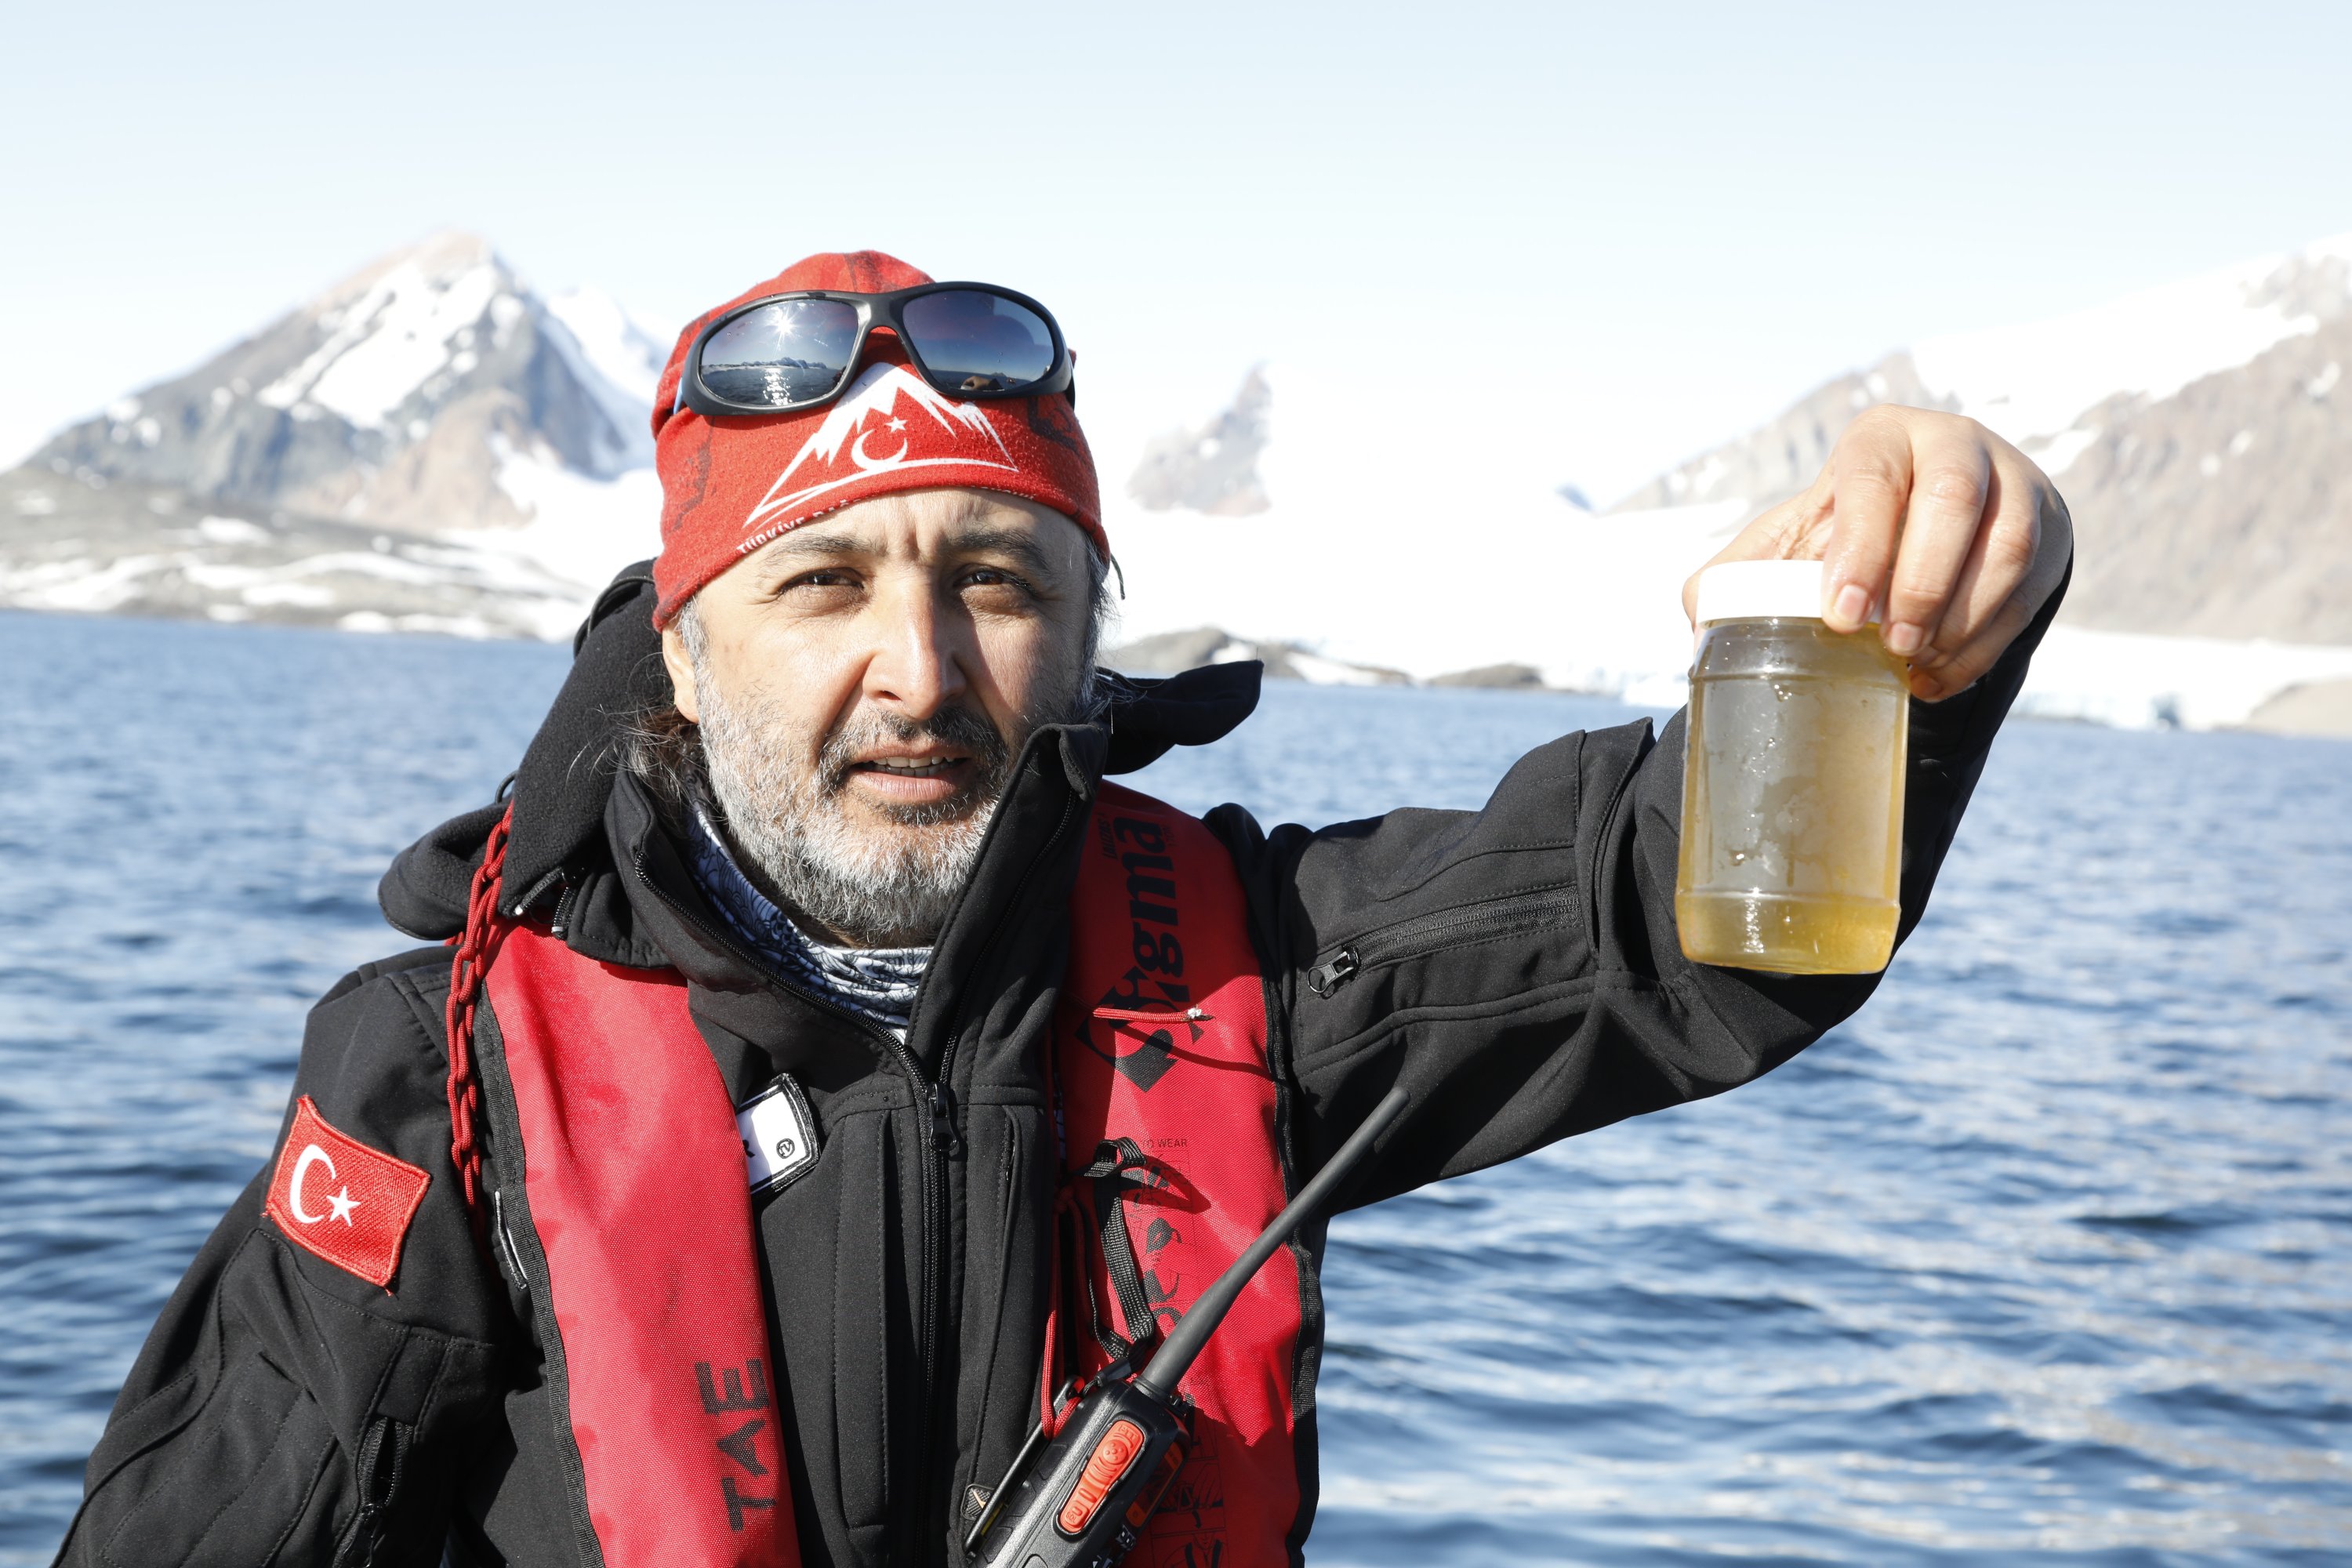 Expedition leader Ersan Başar collects samples from Antarctic water. (Photo by Hayrettin Bektaş)